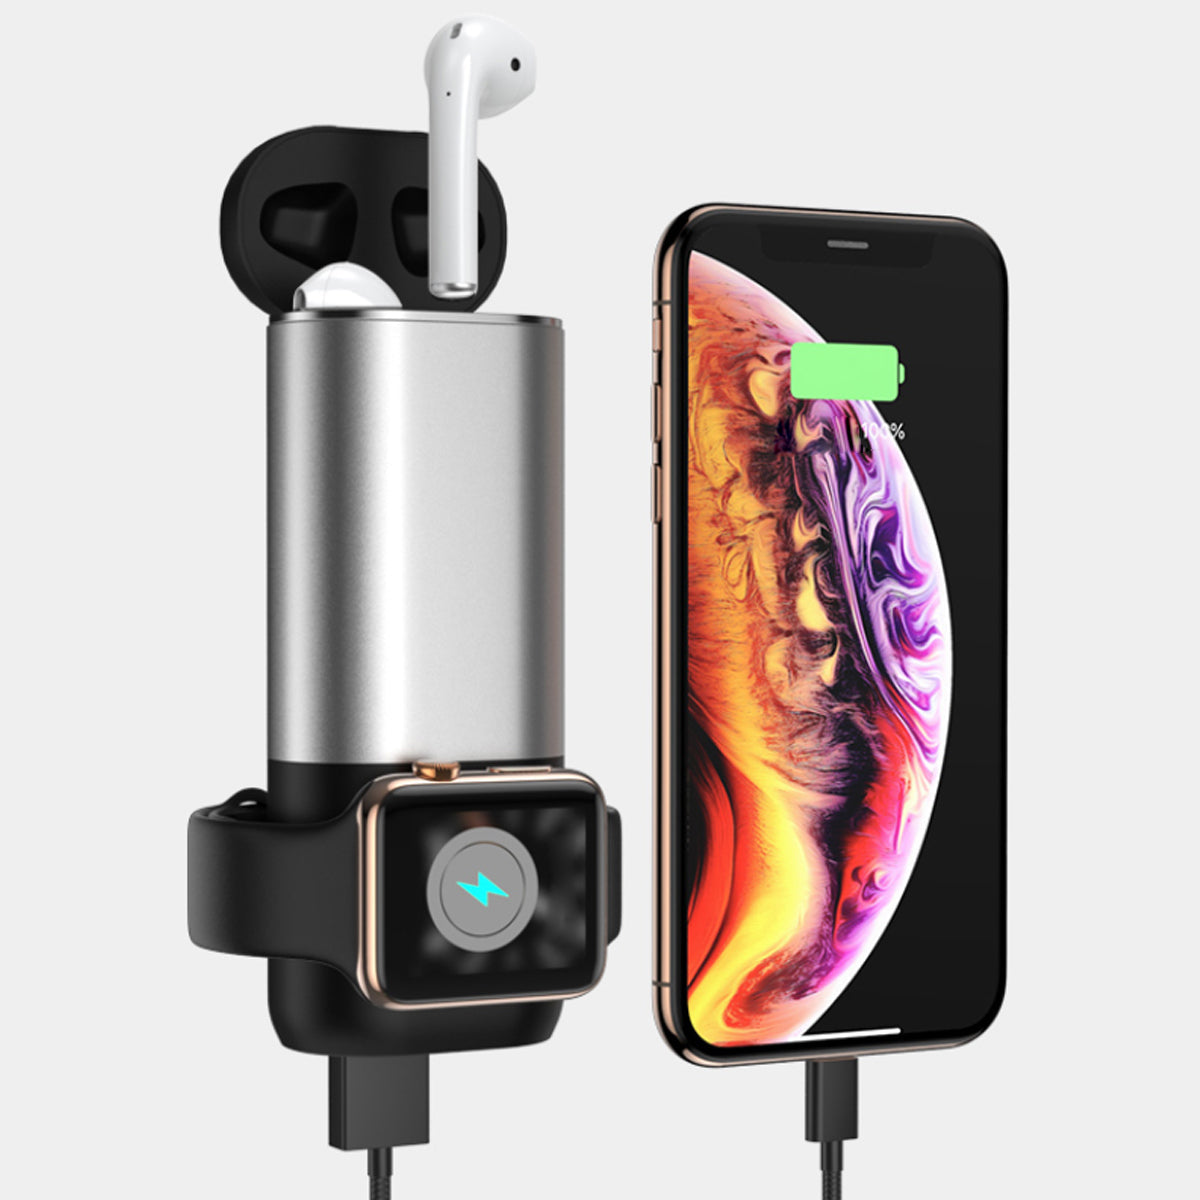 Porta 3 in 1 Wireless Charger For Apple Watch And Airpods Plus Phone by VistaShops